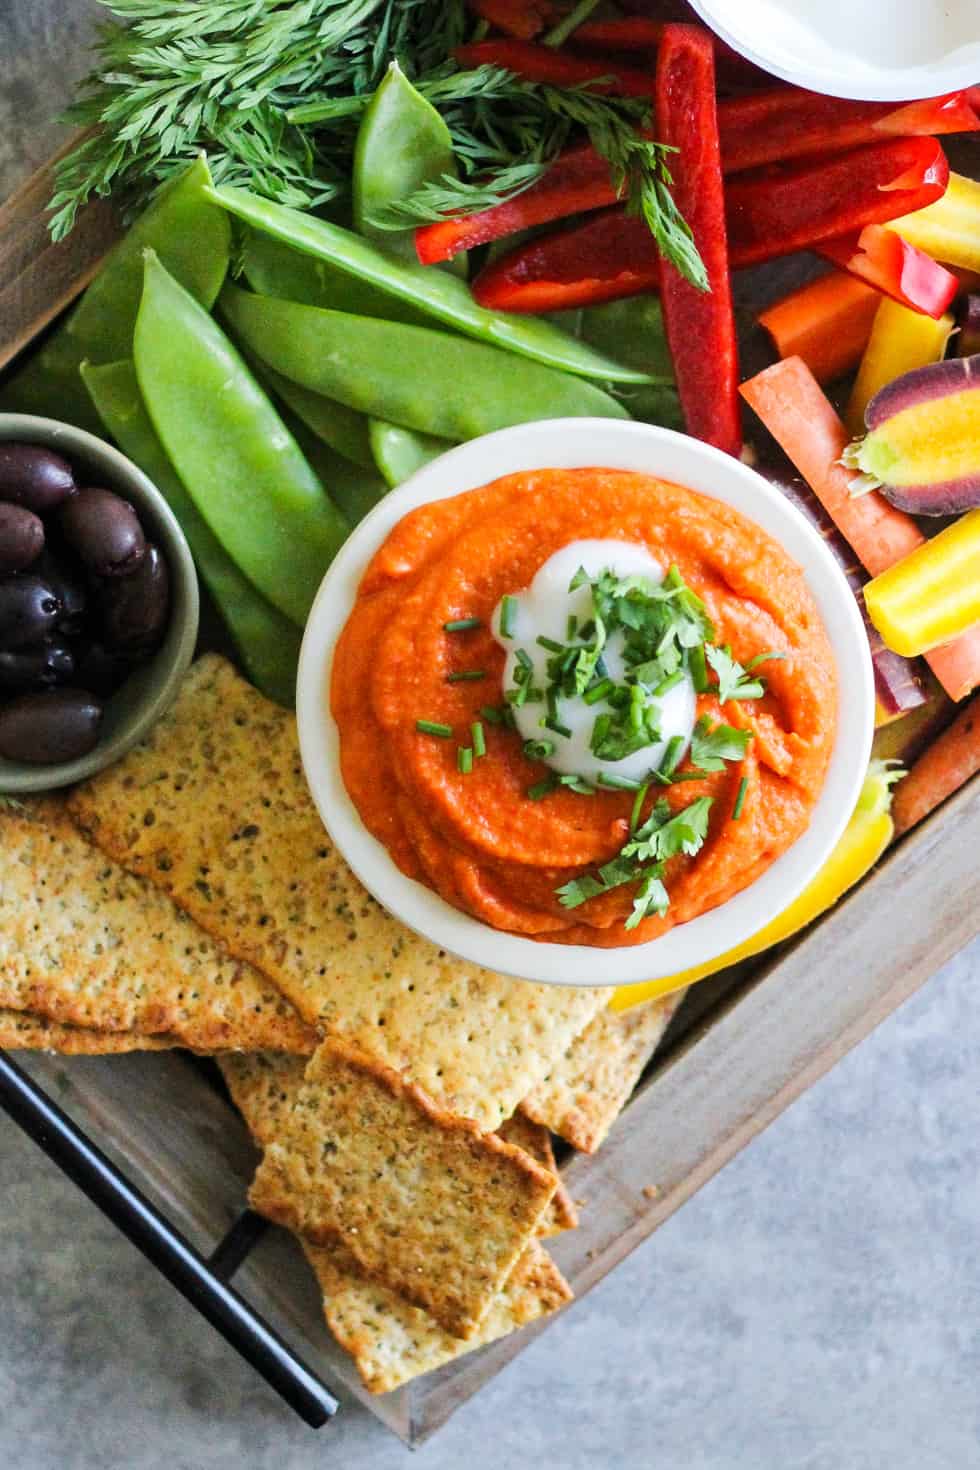 Party board with orange dip and vegetables.